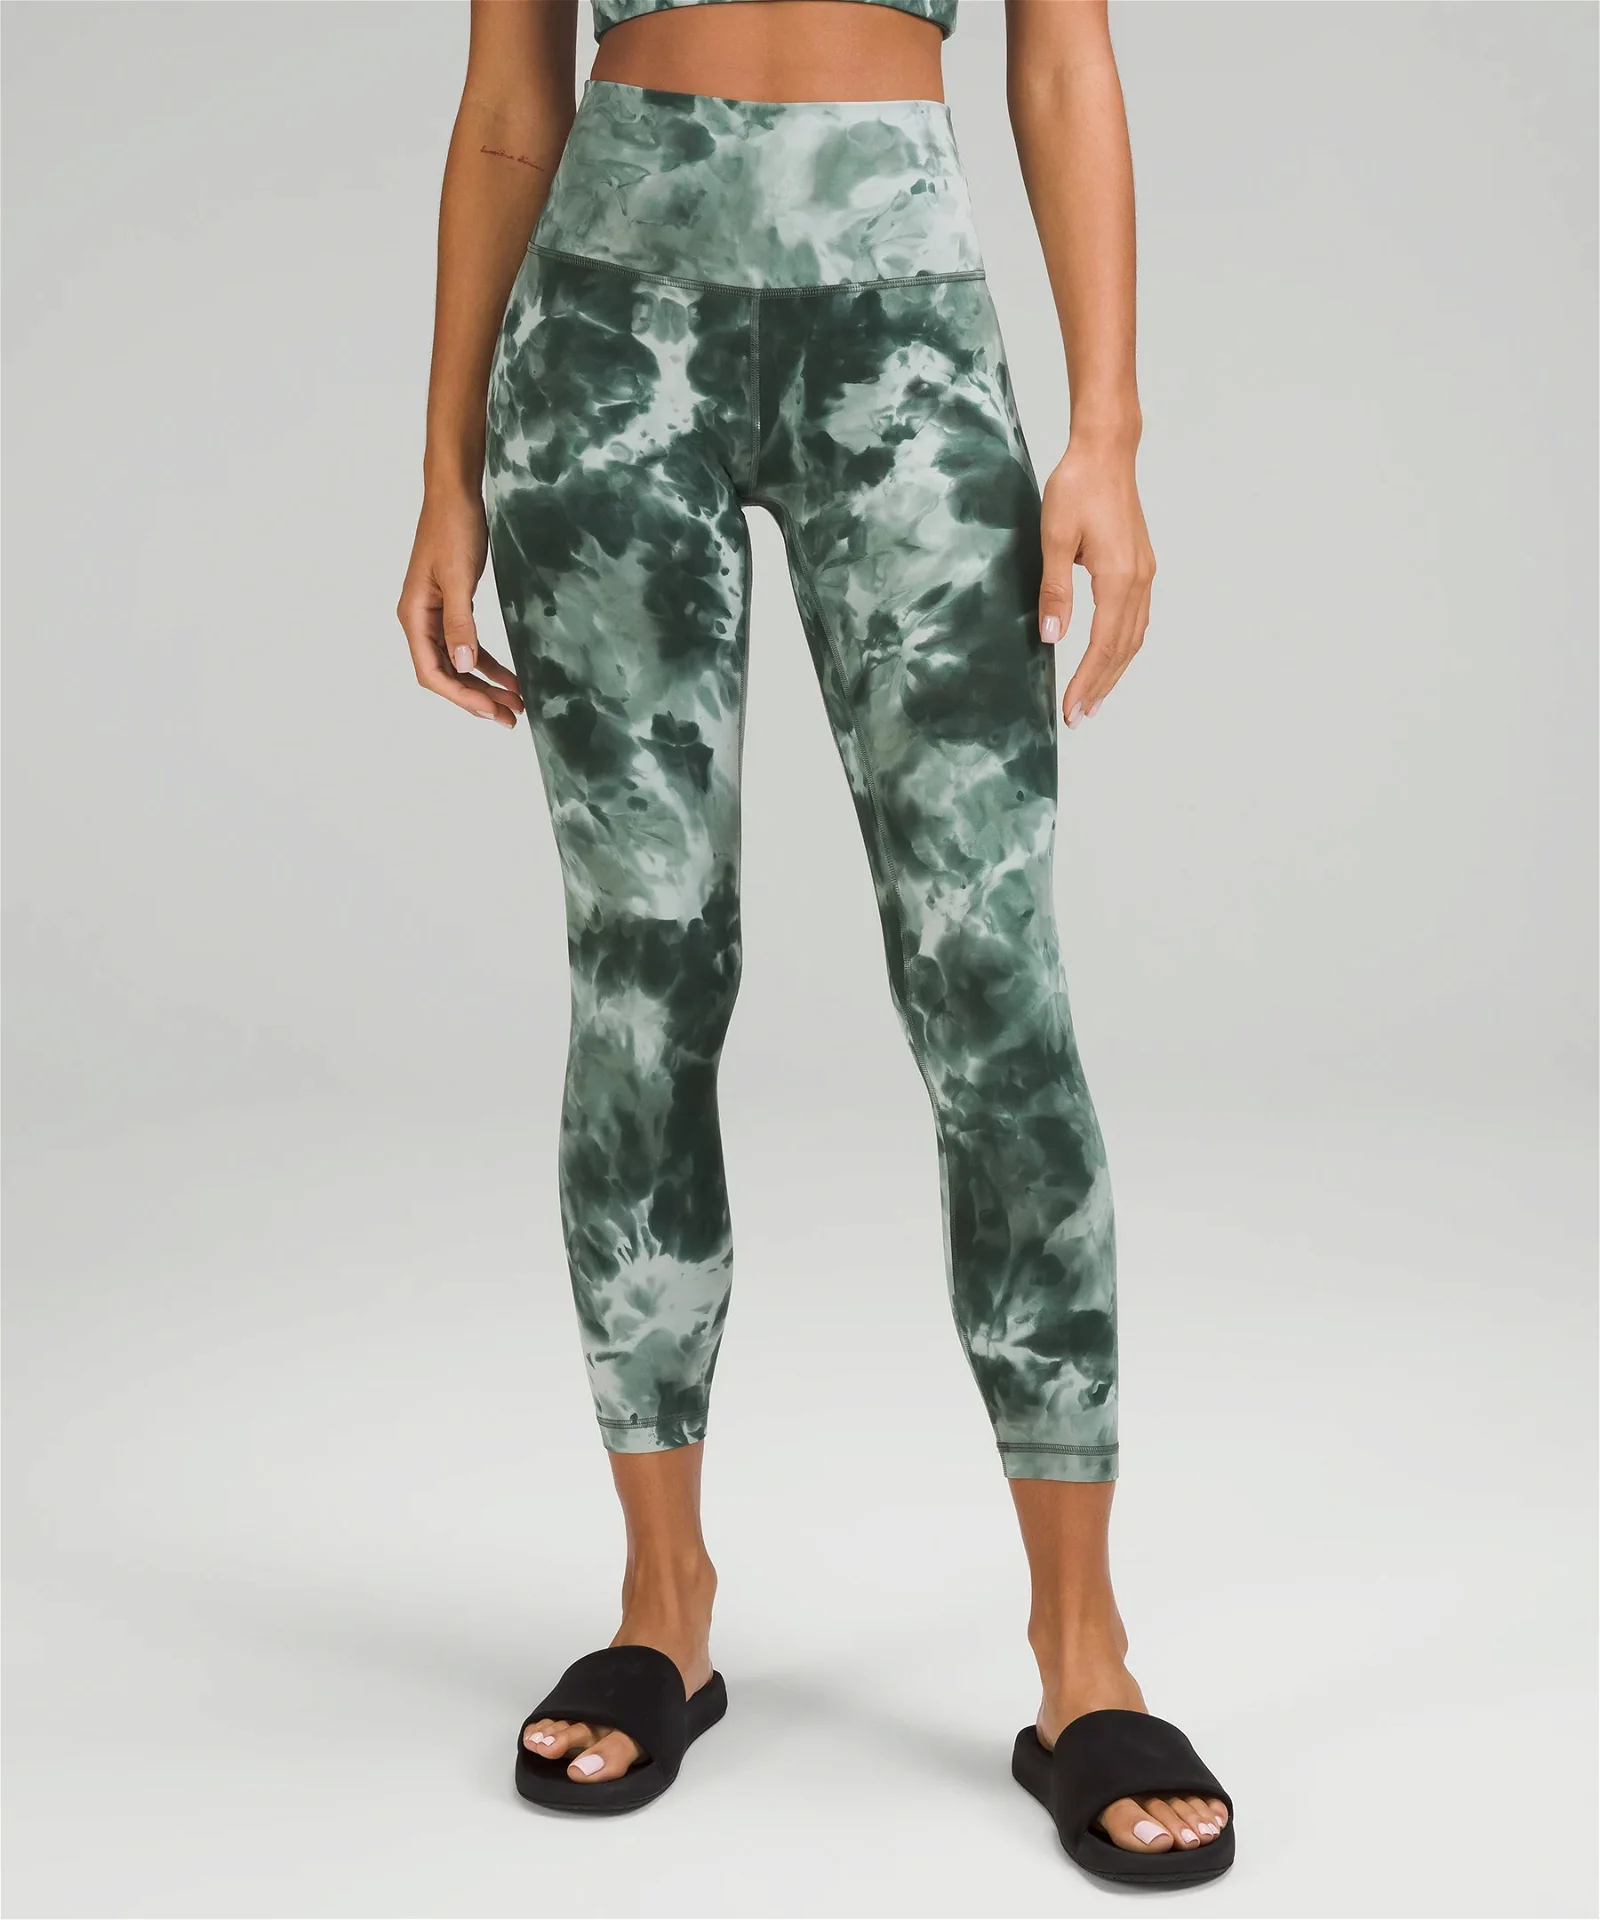 lululemon: Smoked Spruce is on the move